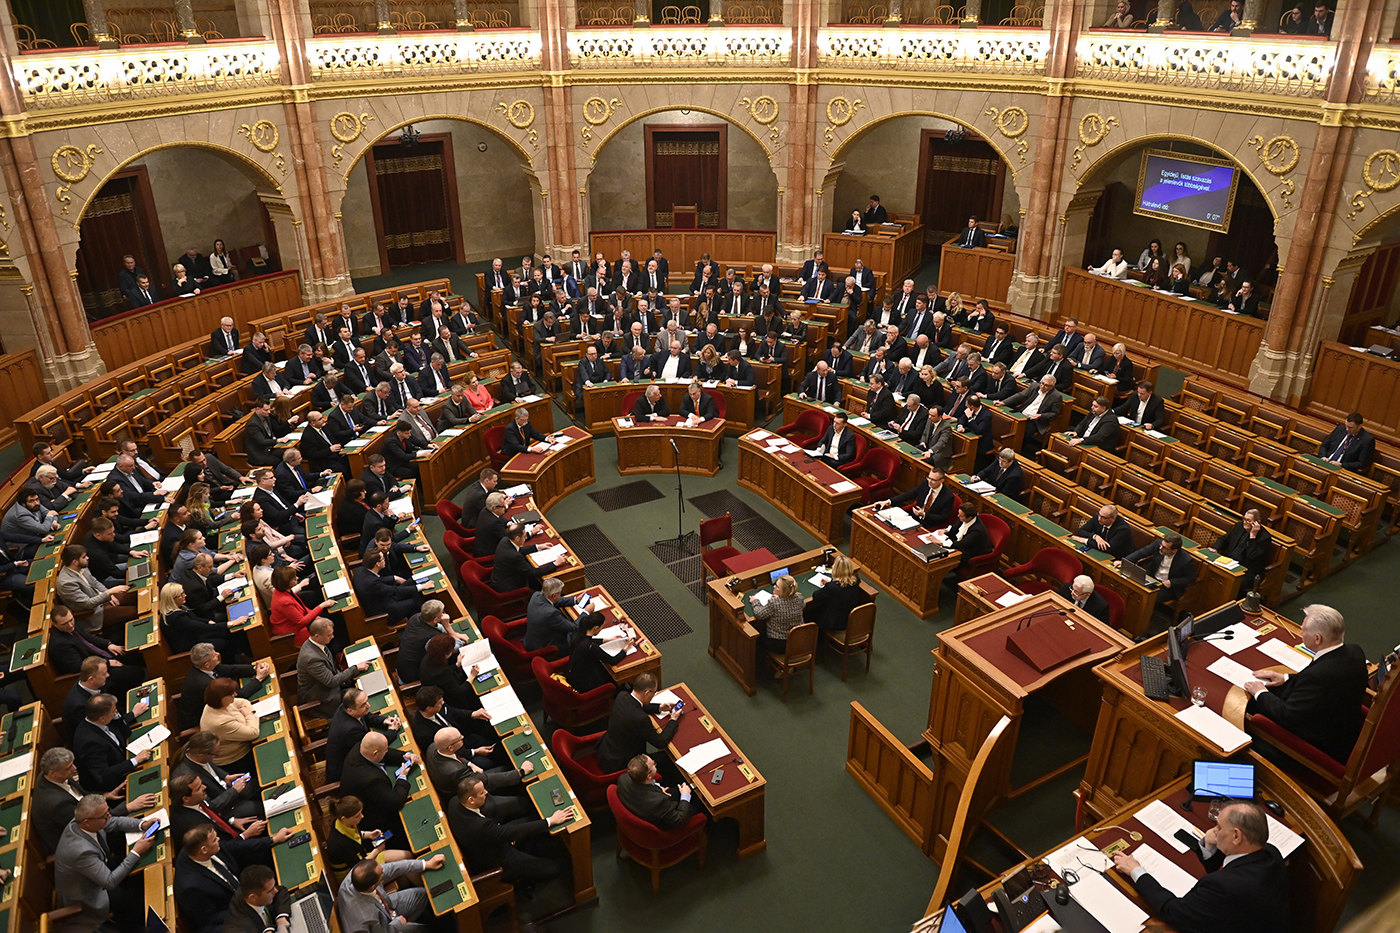 inside of the parliament in Budapest, Hungary as various lawmakers vote on Finland's bid to join NATO